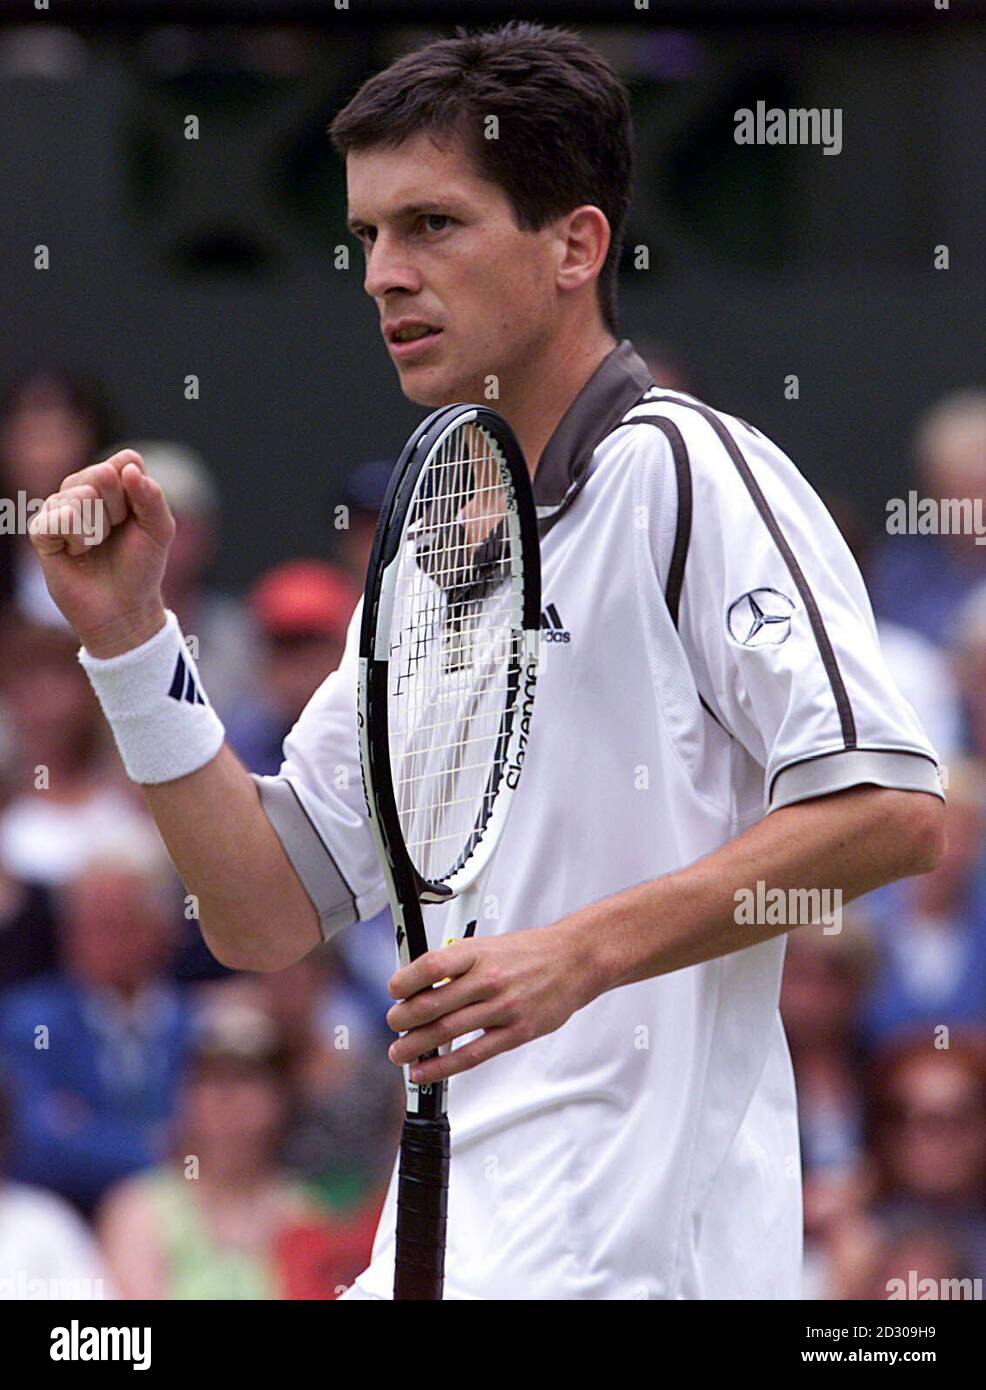 No commercial use. Tim Henman celebrates winning his match against American Jim Courier, during the 1999 Wimbledon tennis Championships. Stock Photo